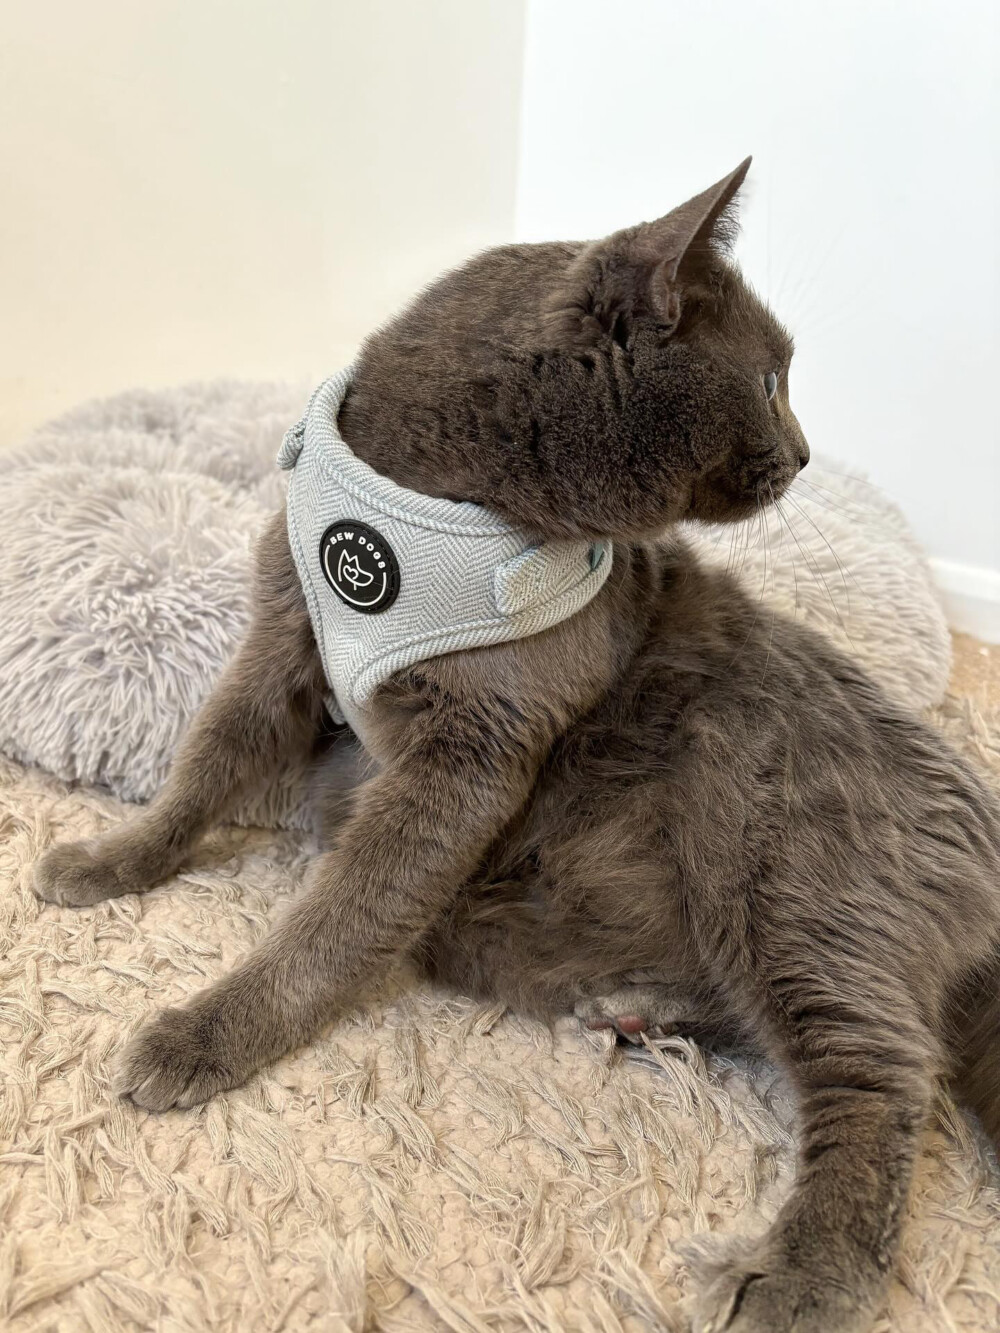 A dark grey coloured cat, is wearing a sky blue harness and sitting on a grey fluffy cushion, looking away from the camera